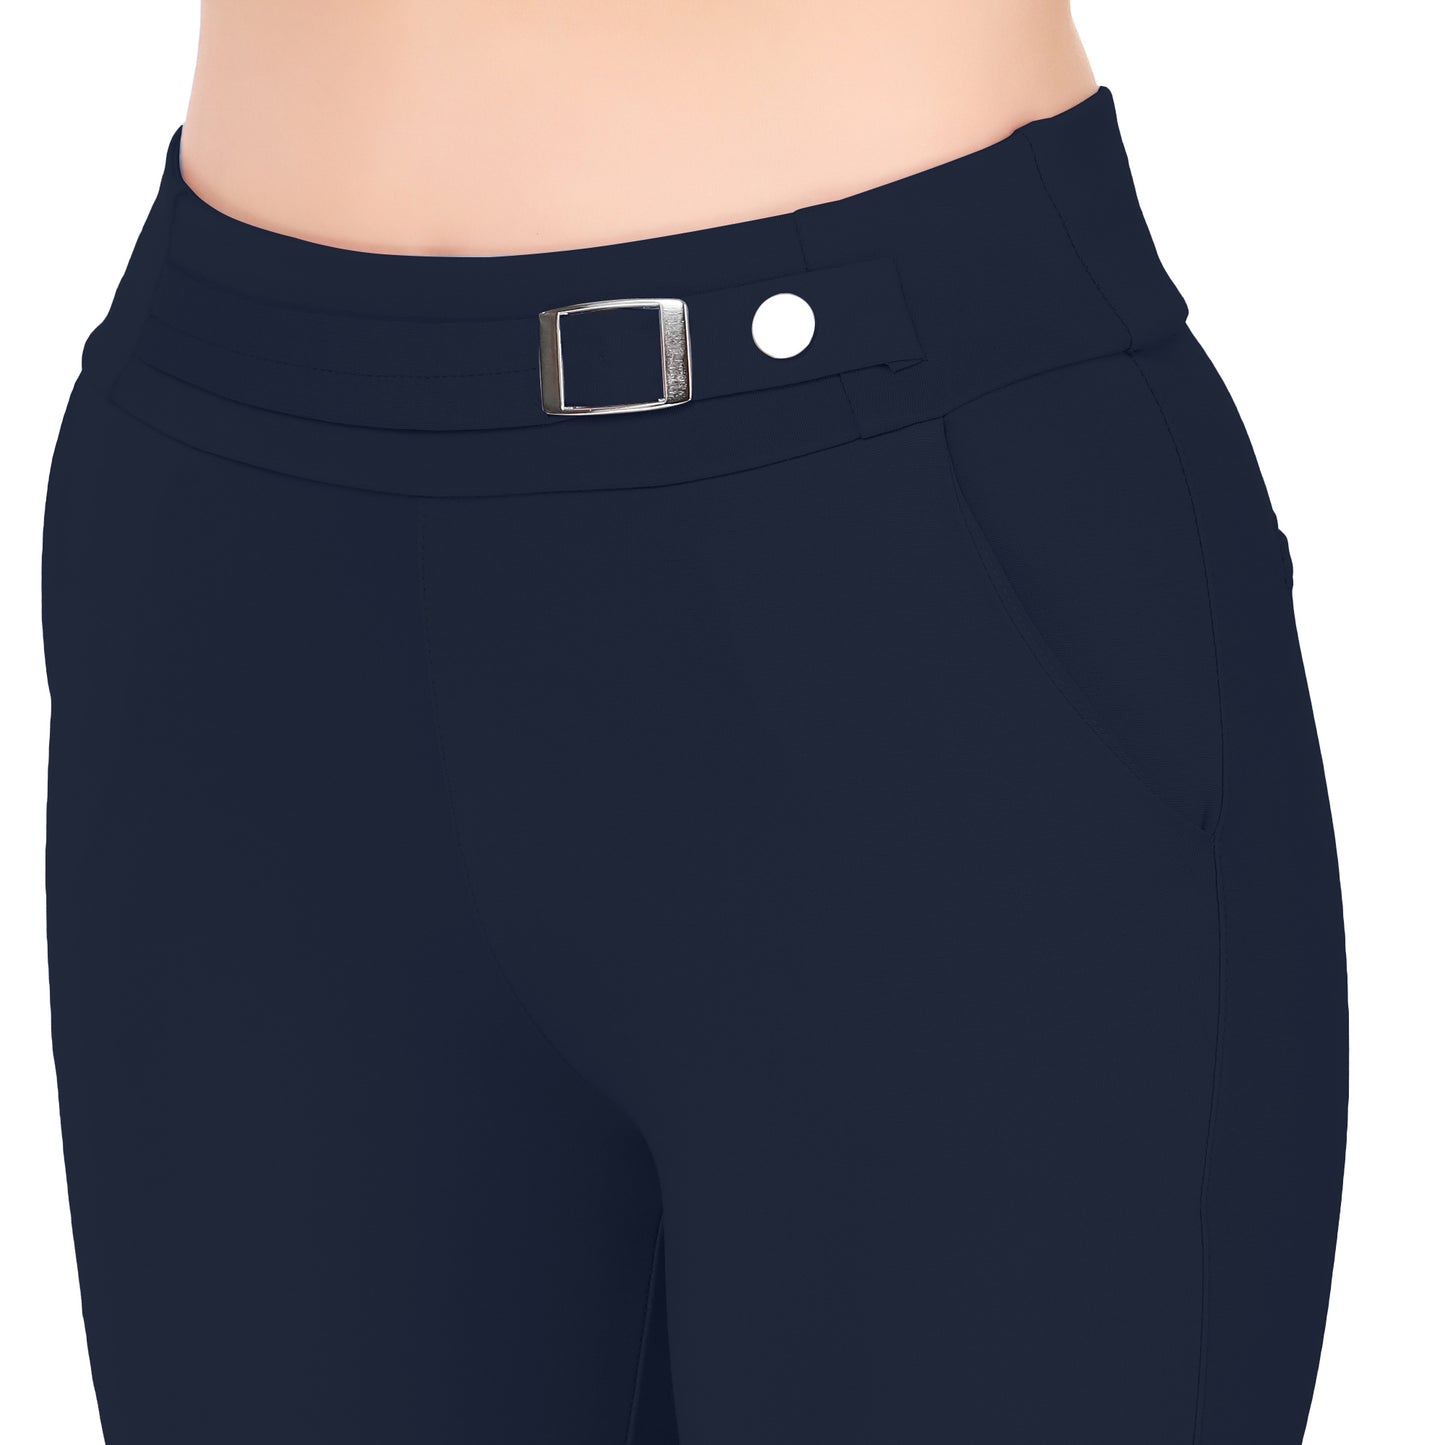 Most Comfortable Women's Mid-Waist Jeggings with 2 Front Pockets - DarkSlateBlue